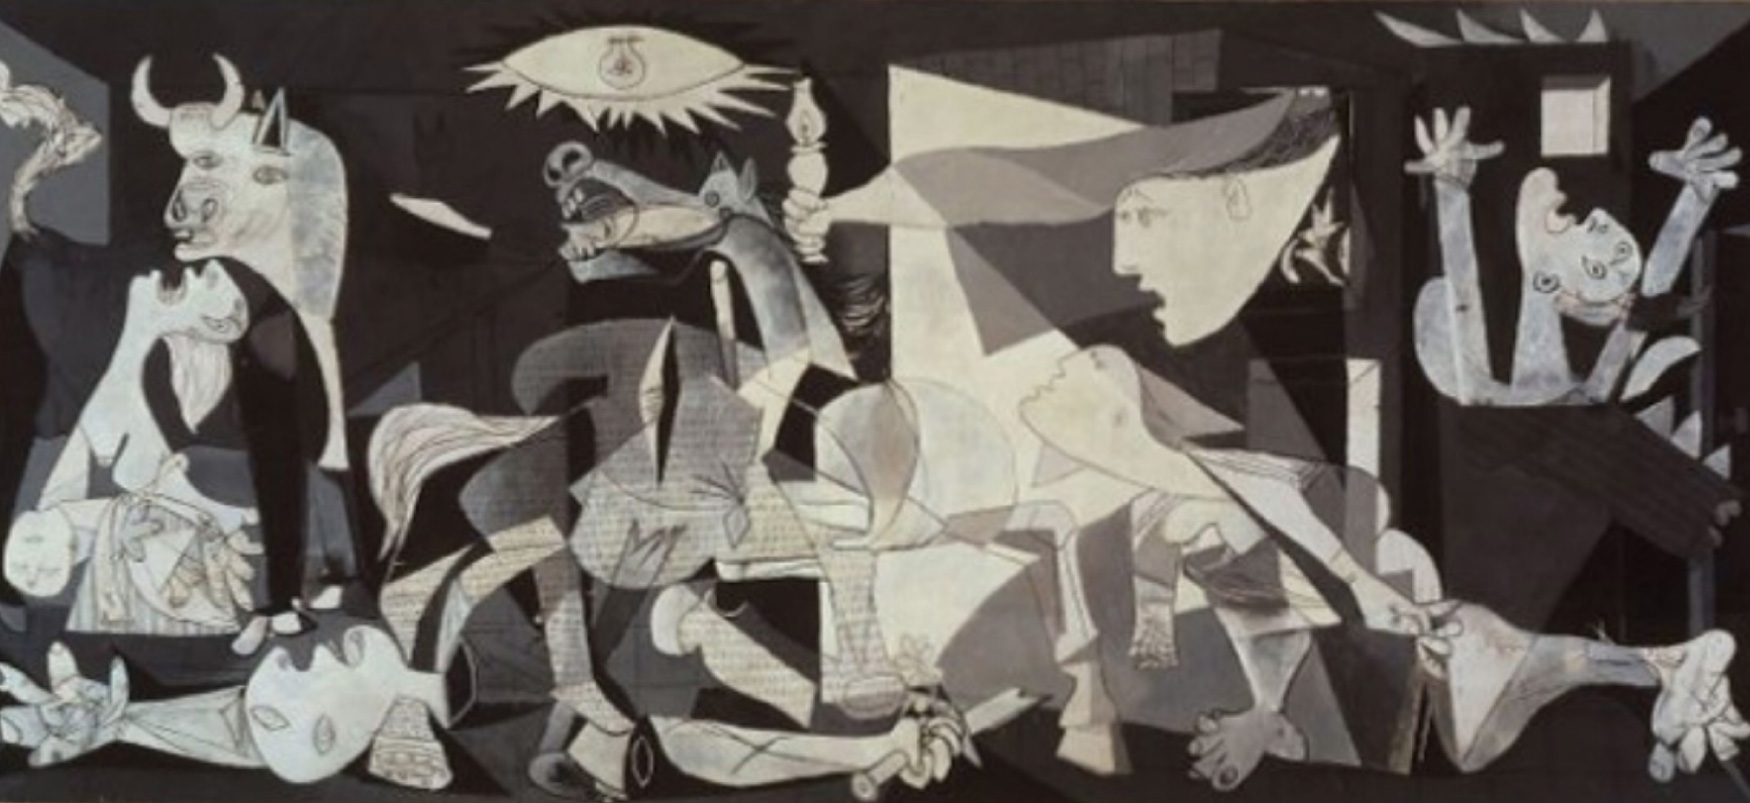 Guernica is a large grey, black, and white painting by Pablo Picasso. The prominent images in the painting are a gored horse, a bull, a screaming woman, a dead baby, a dismembered soldier, and flames. The distorted proportions that Picasso's works are known for are present in this painting.